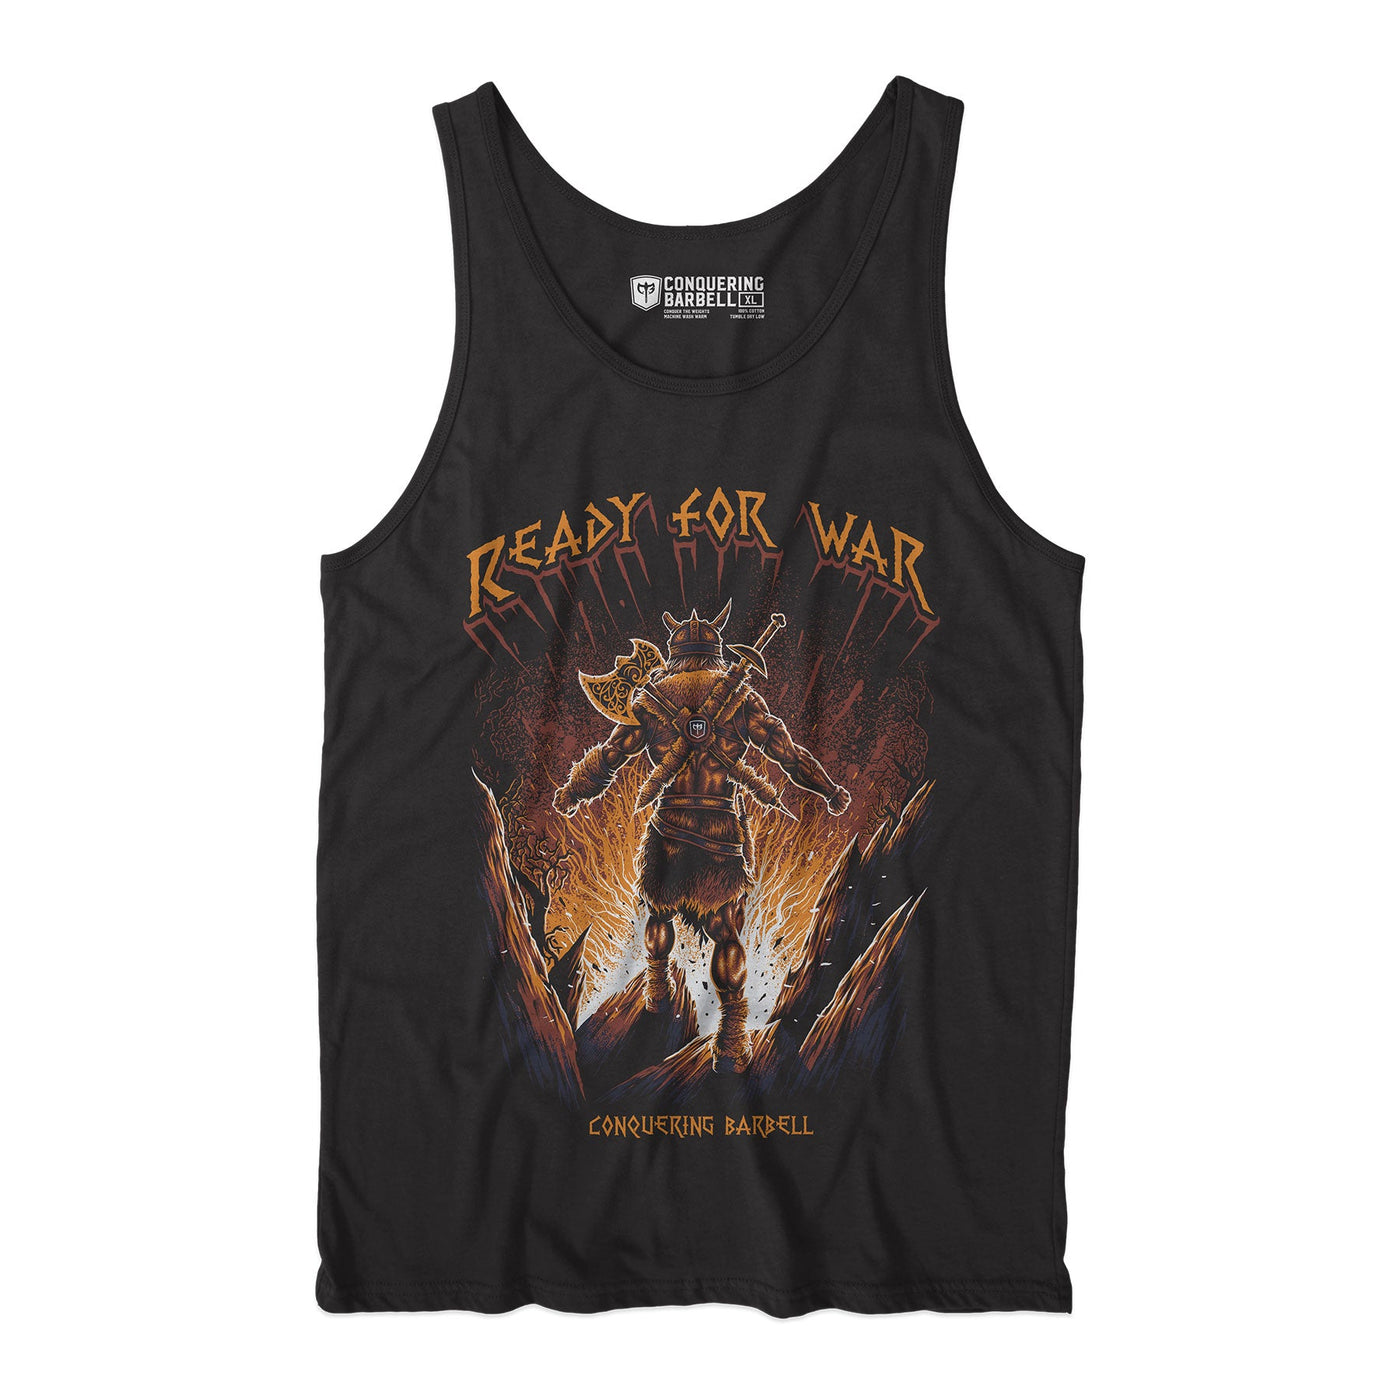 Ready for War - Black tank top - Conquering Barbell